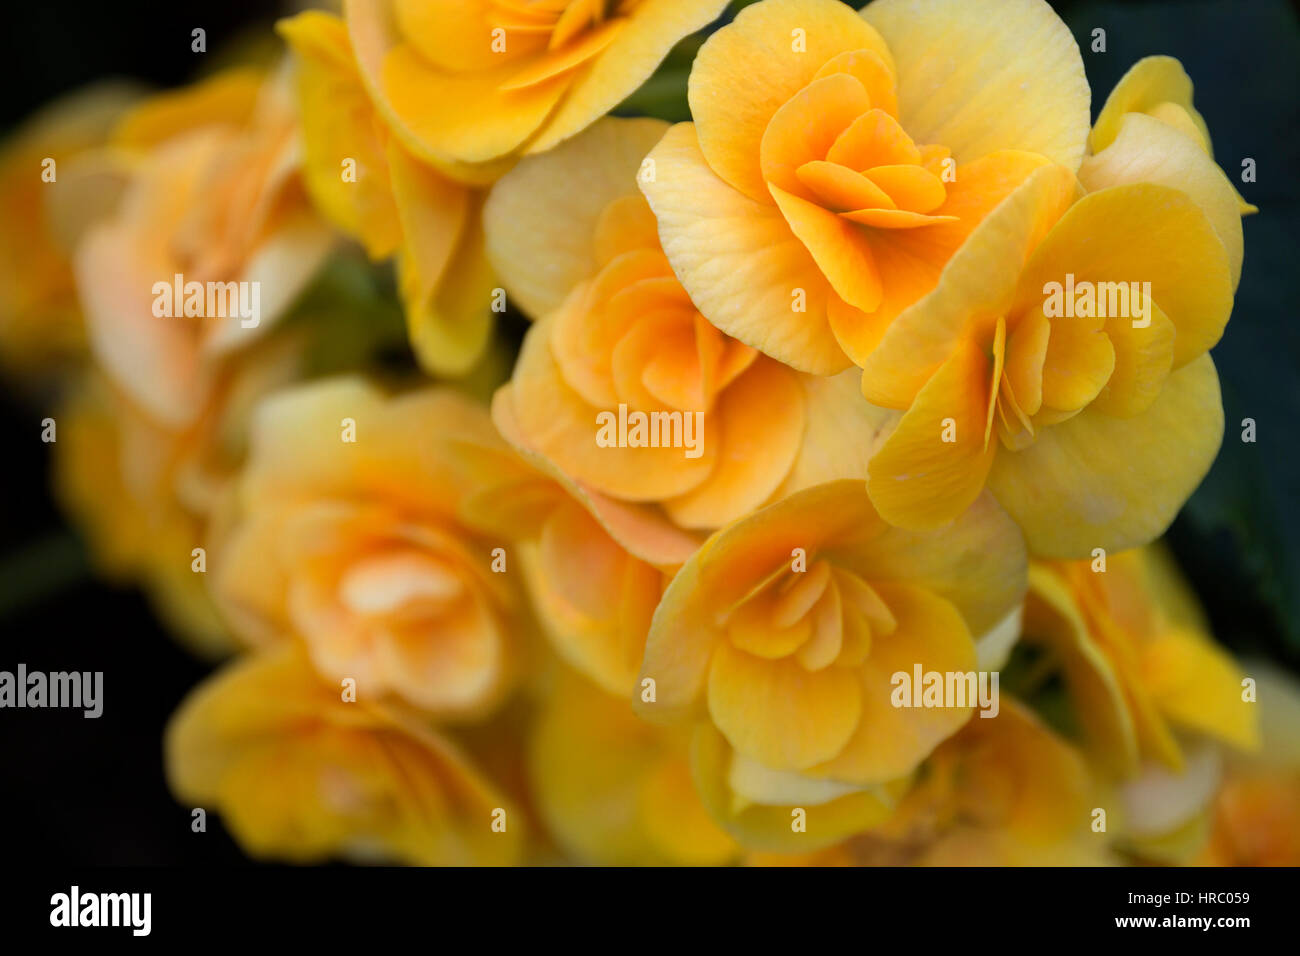 nature spring floral background yellow begonia flower close up selective focus one flower on foreground in focus soft focus blurred flowers on backgro Stock Photo